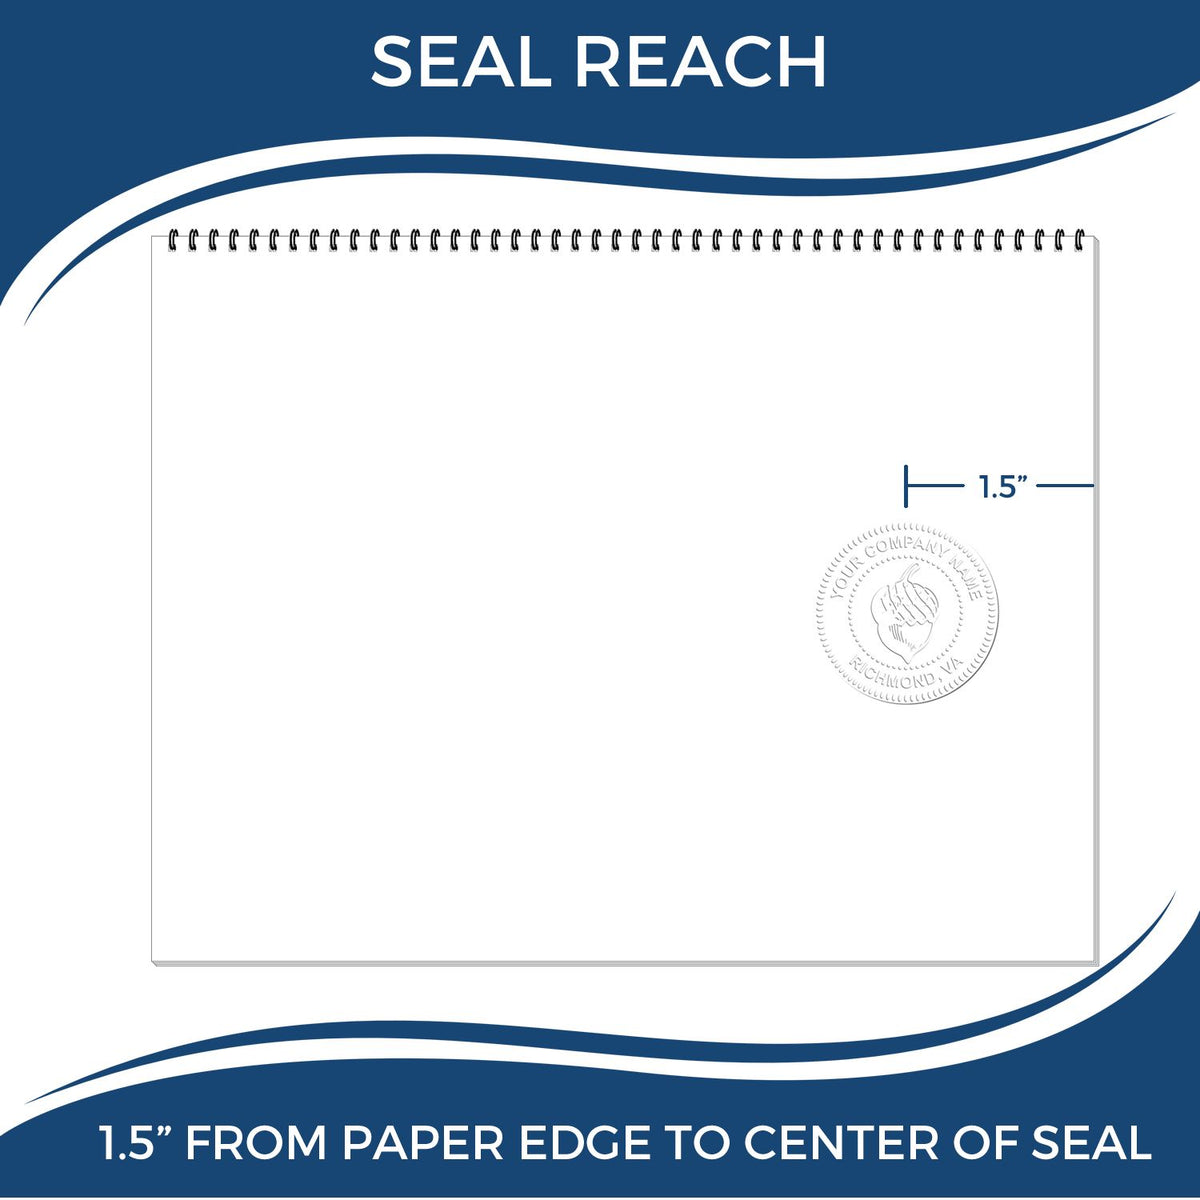 An infographic showing the seal reach which is represented by a ruler and a miniature seal image of the Gift Arkansas Landscape Architect Seal